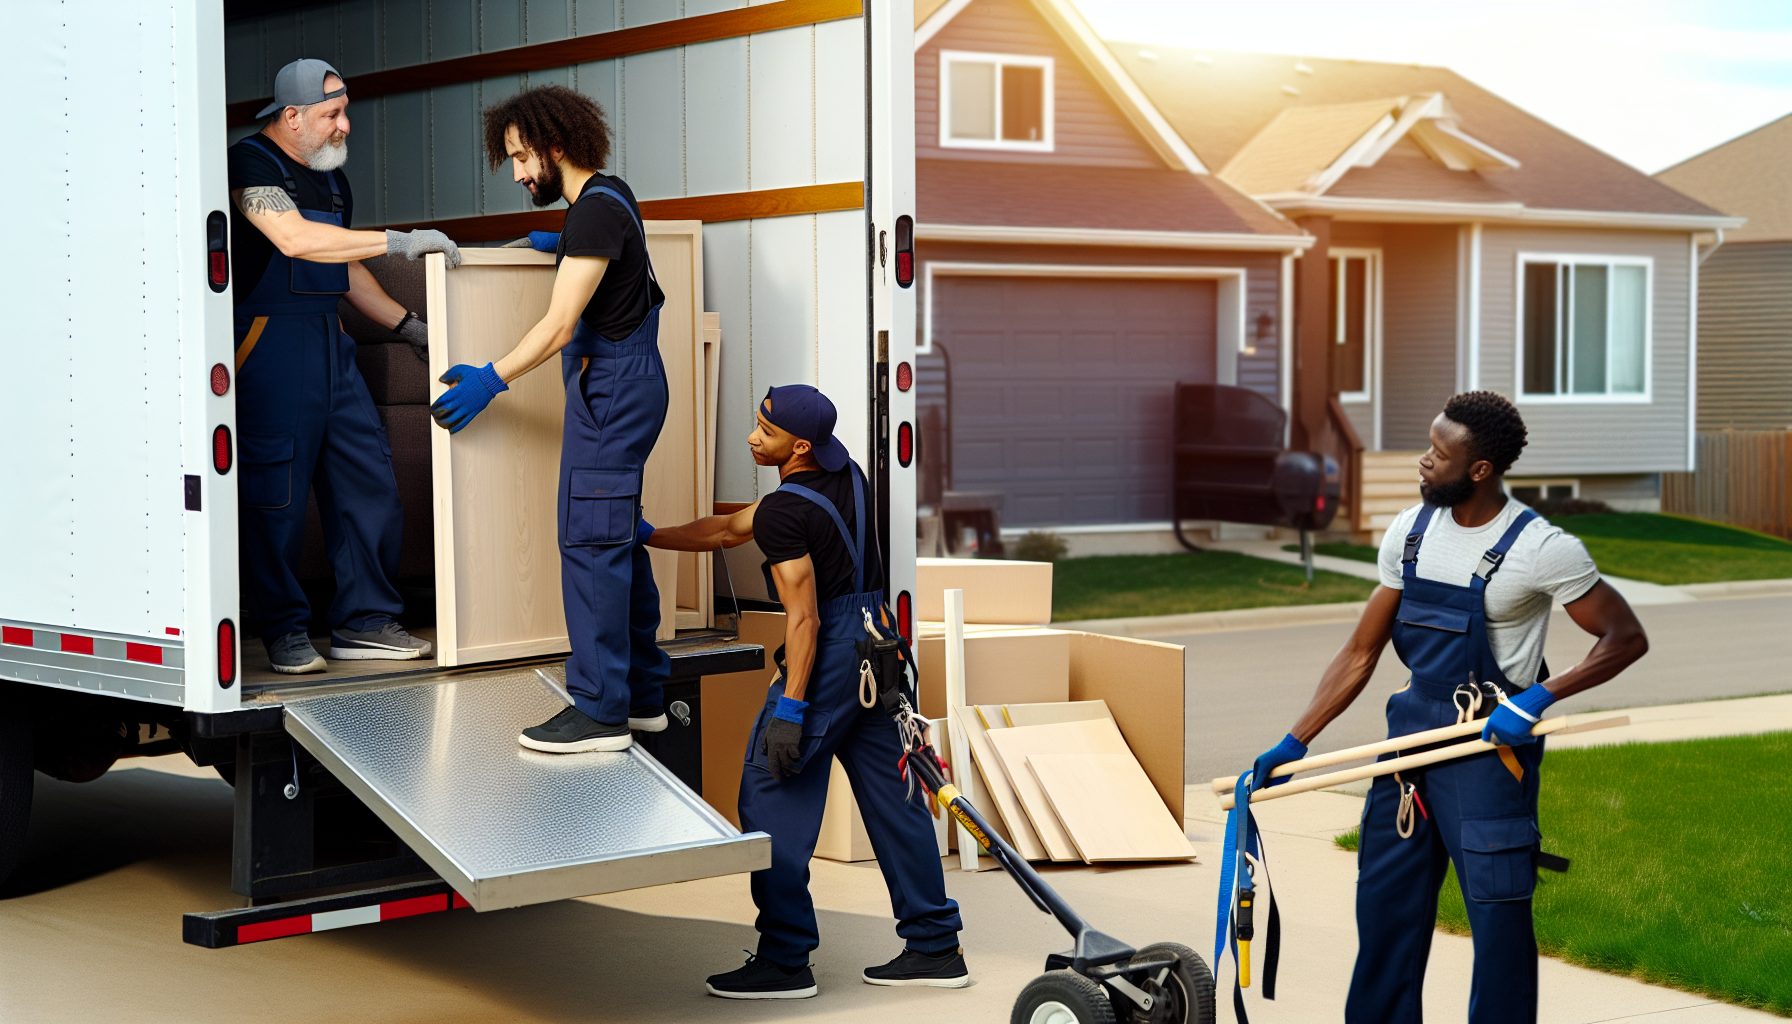 Professional movers loading furniture into a moving truck